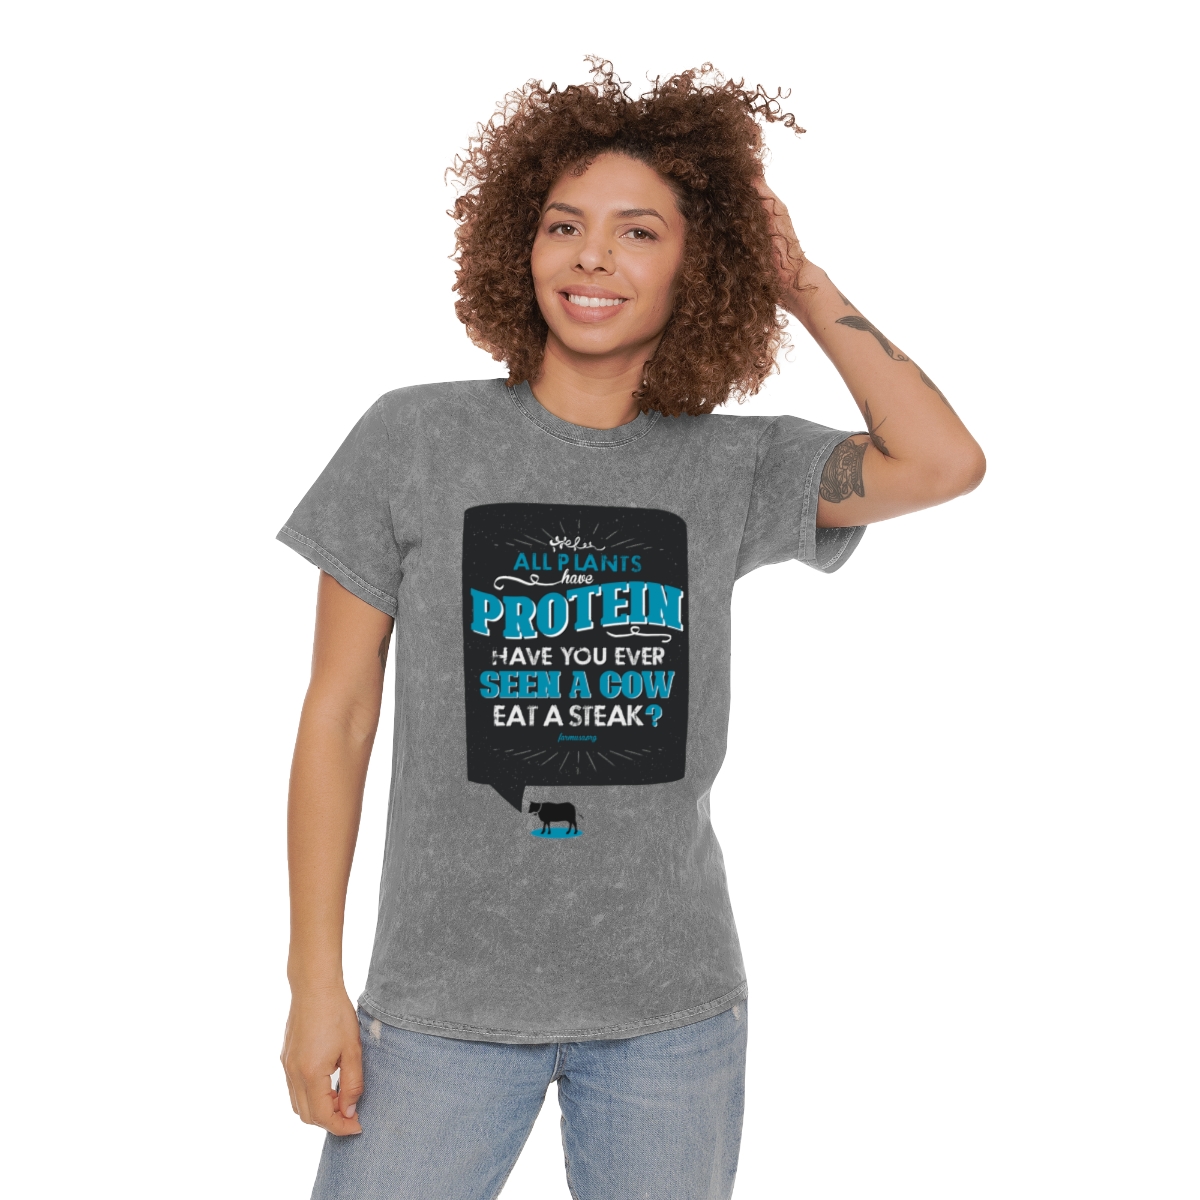 ALL PLANTS HAVE PROTEIN: Unisex Mineral Wash T-Shirt product thumbnail image